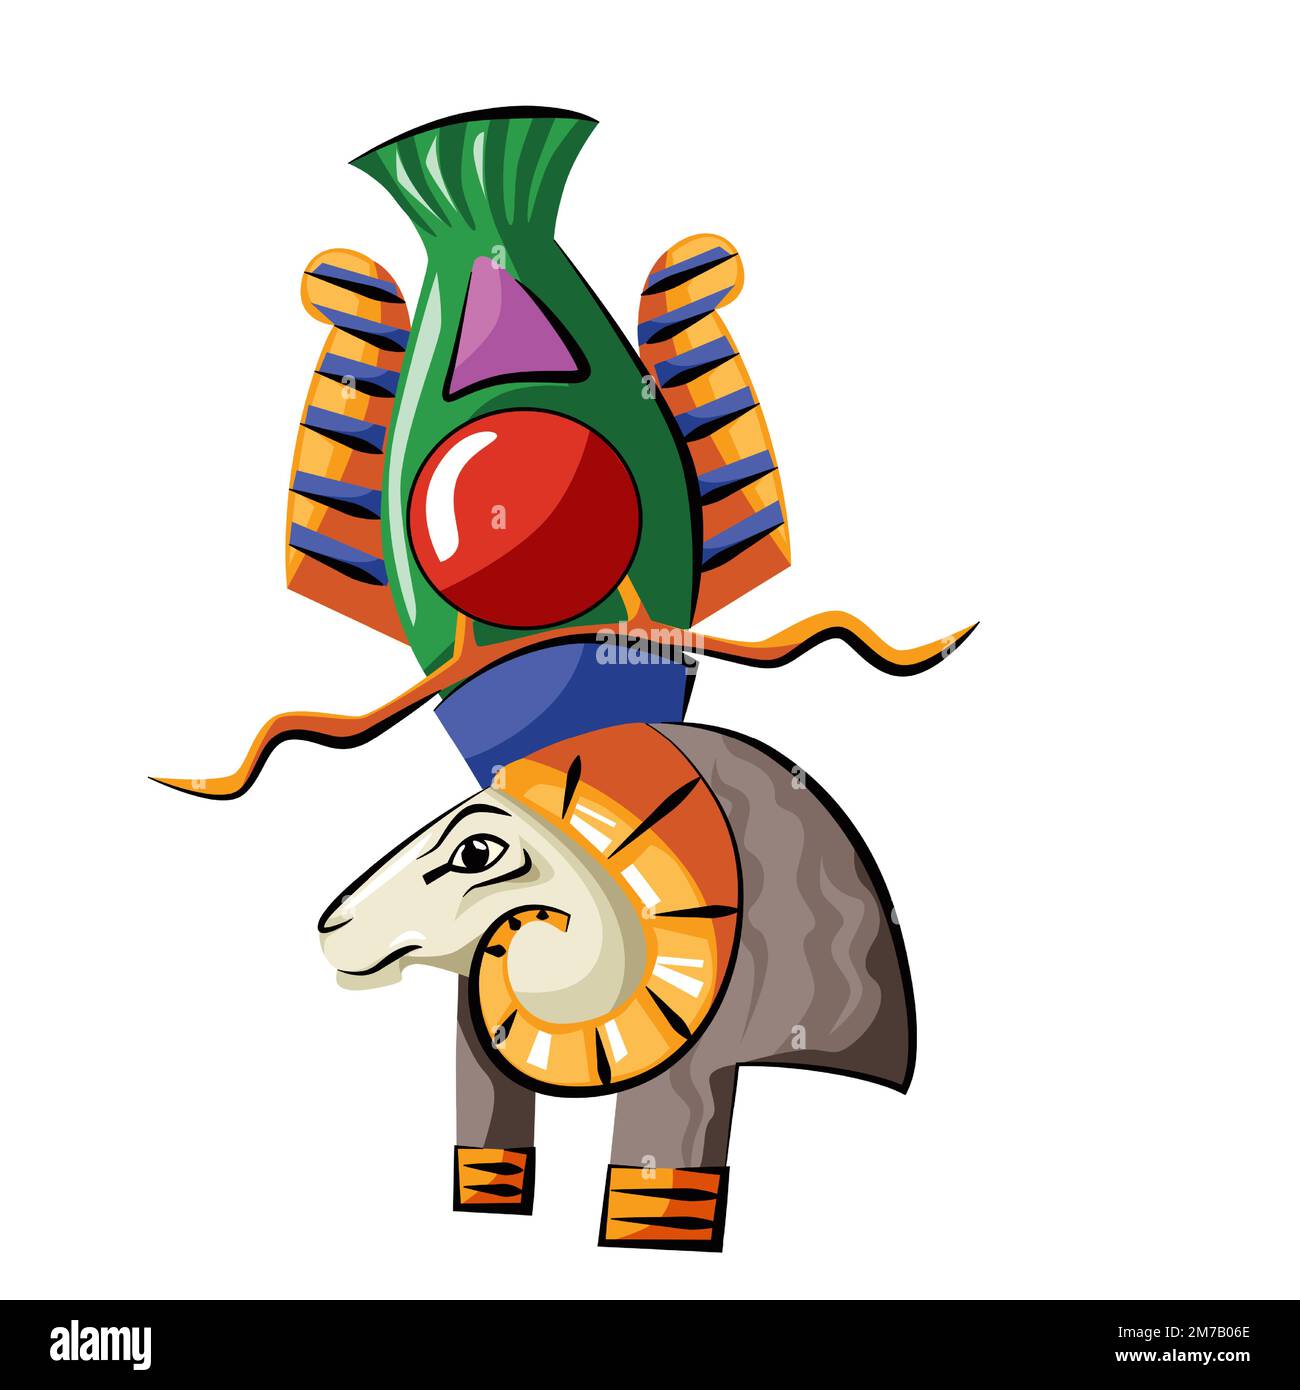 Ancient Egypt head of god source of Nile Khnum cartoon vector. Egyptian culture religious symbol, ram headed creator god with spiral-twisted horns isolated on white background Stock Vector